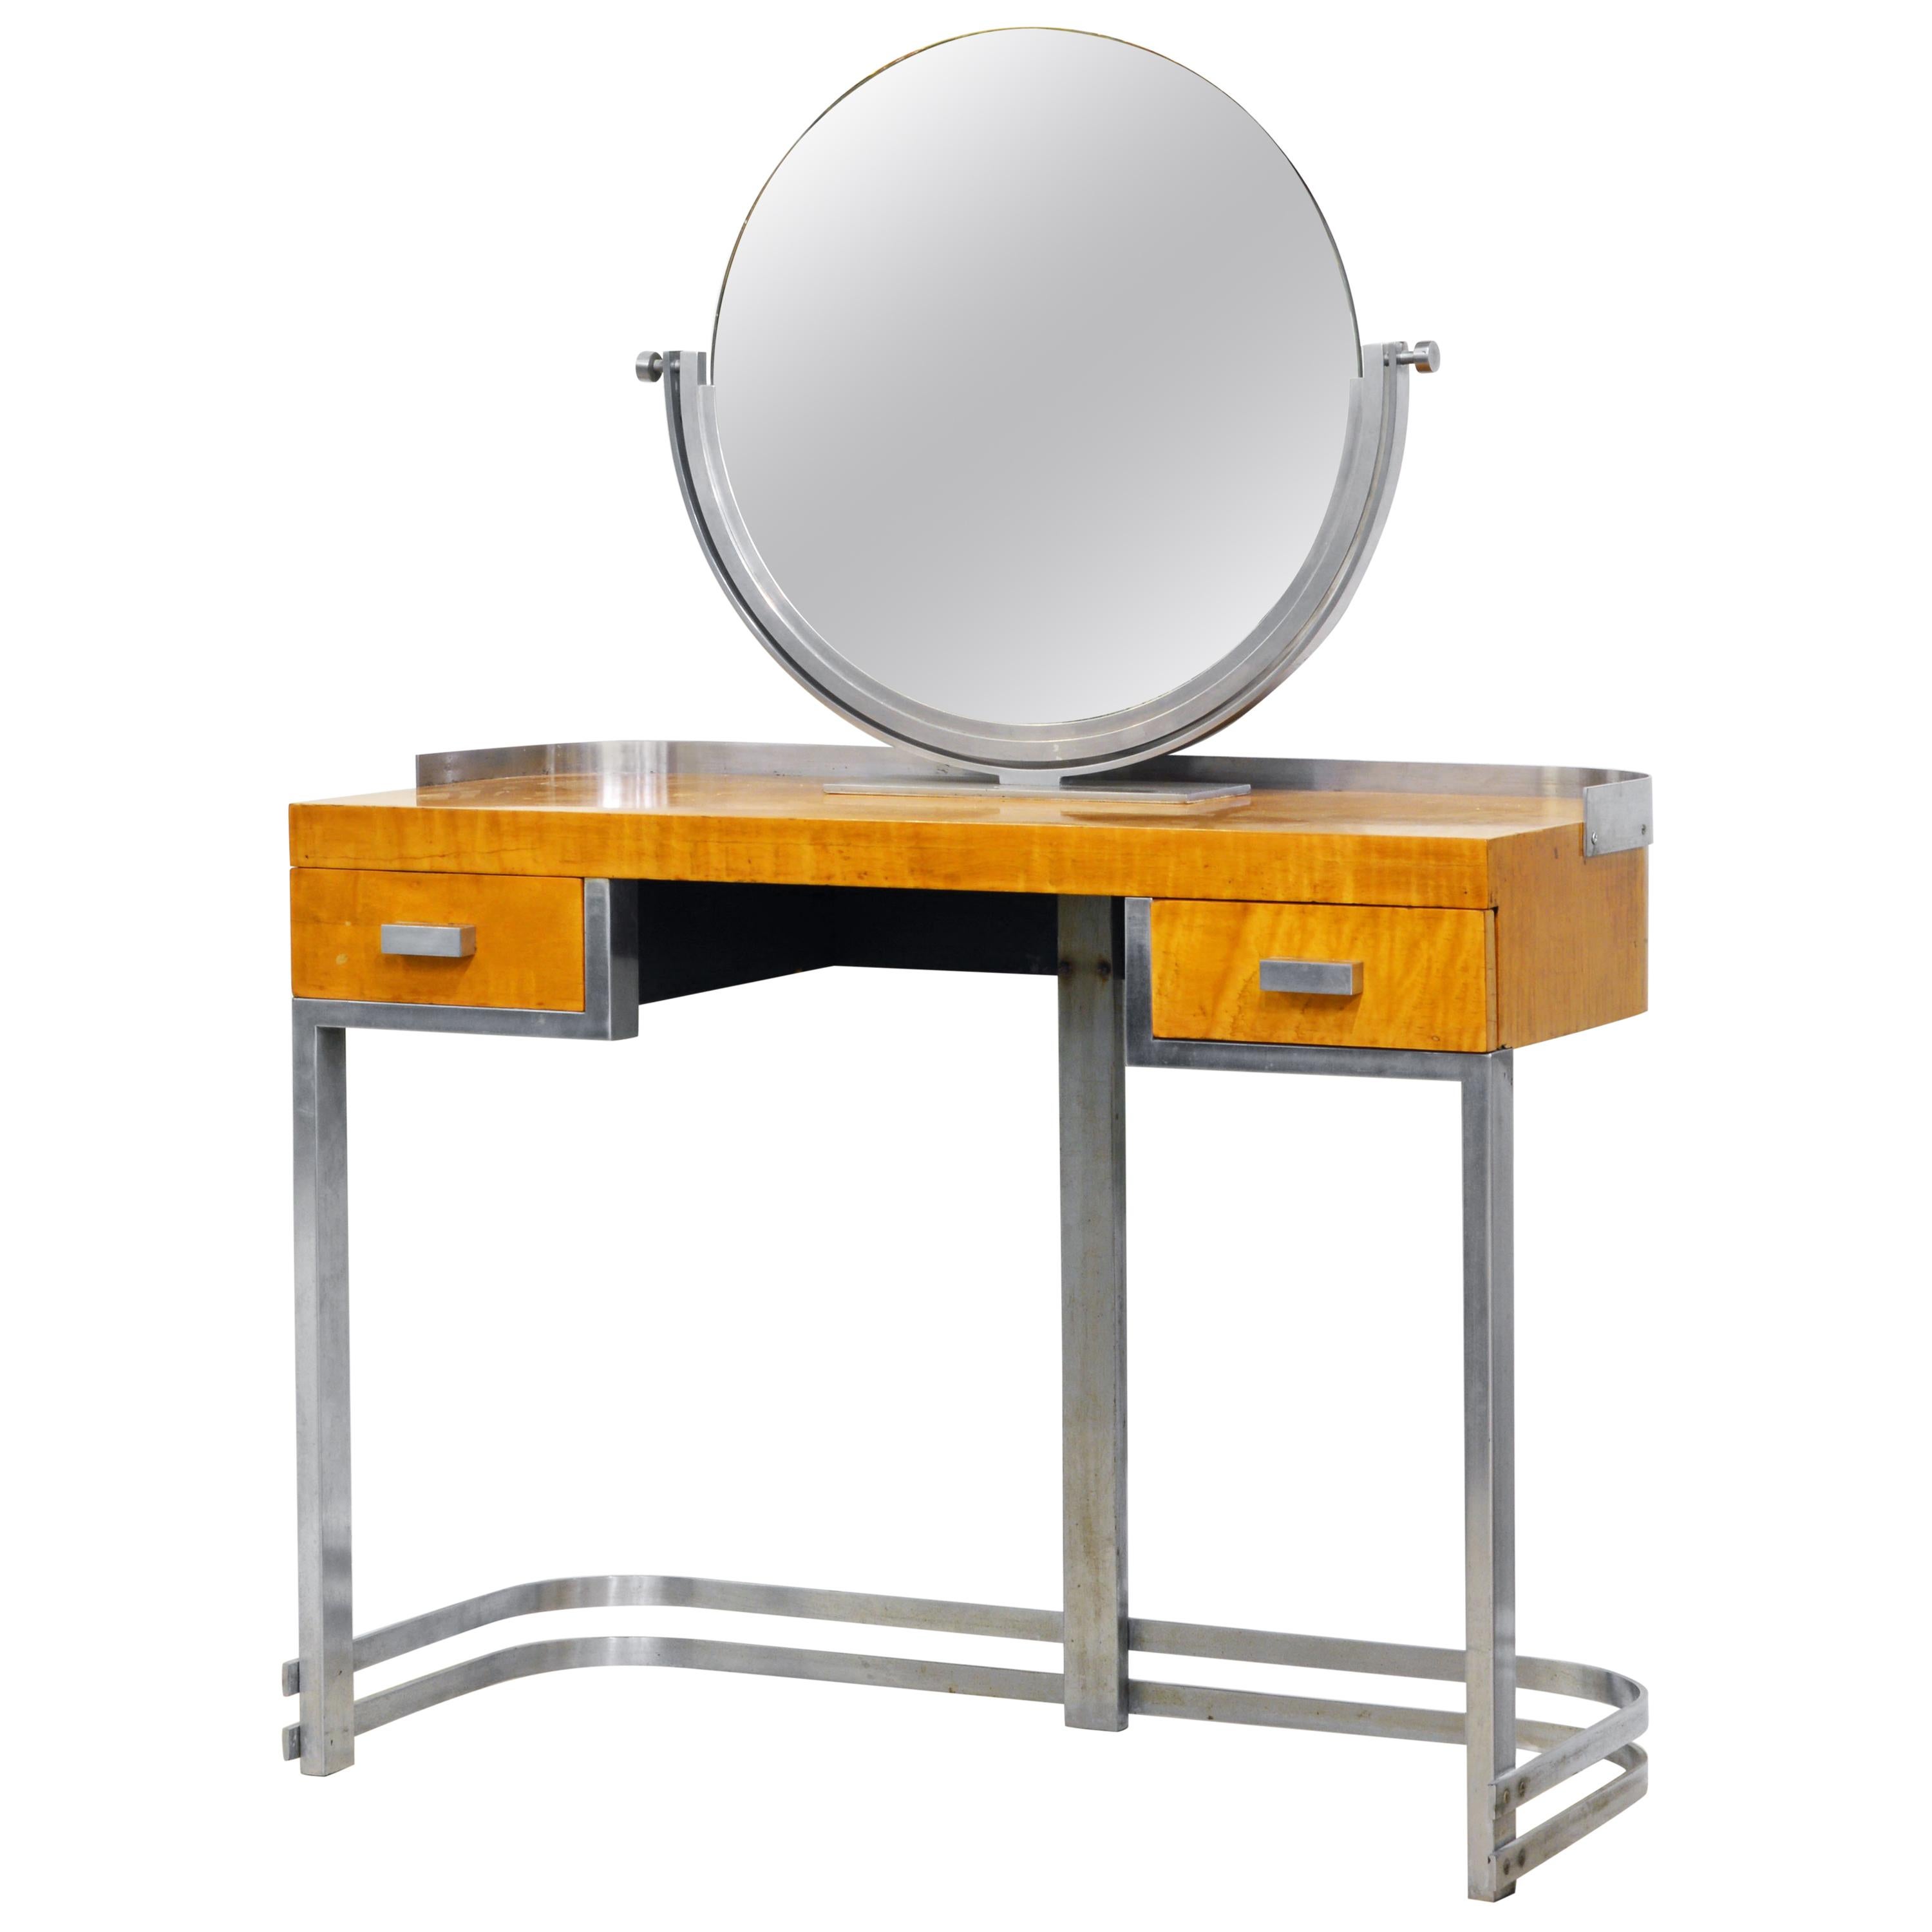 Art Deco Steel and Maple Vanity Desk and Mirror in the Manner of Donald Deskey